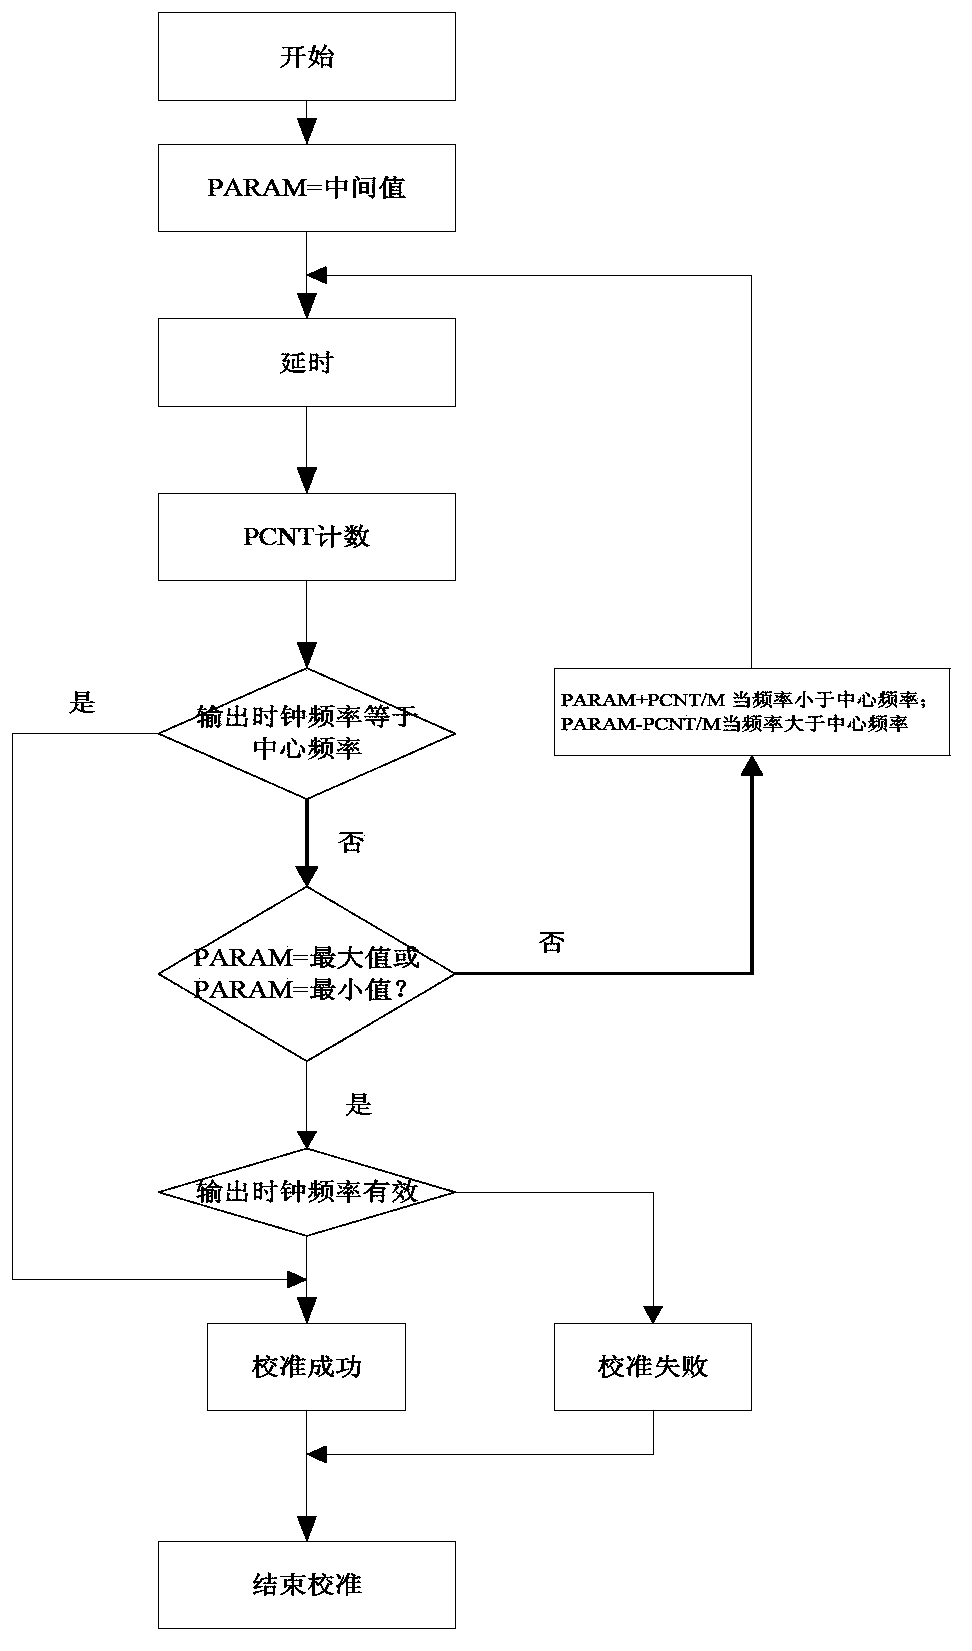 OSC frequency automatic calibration circuit and automatic calibration method